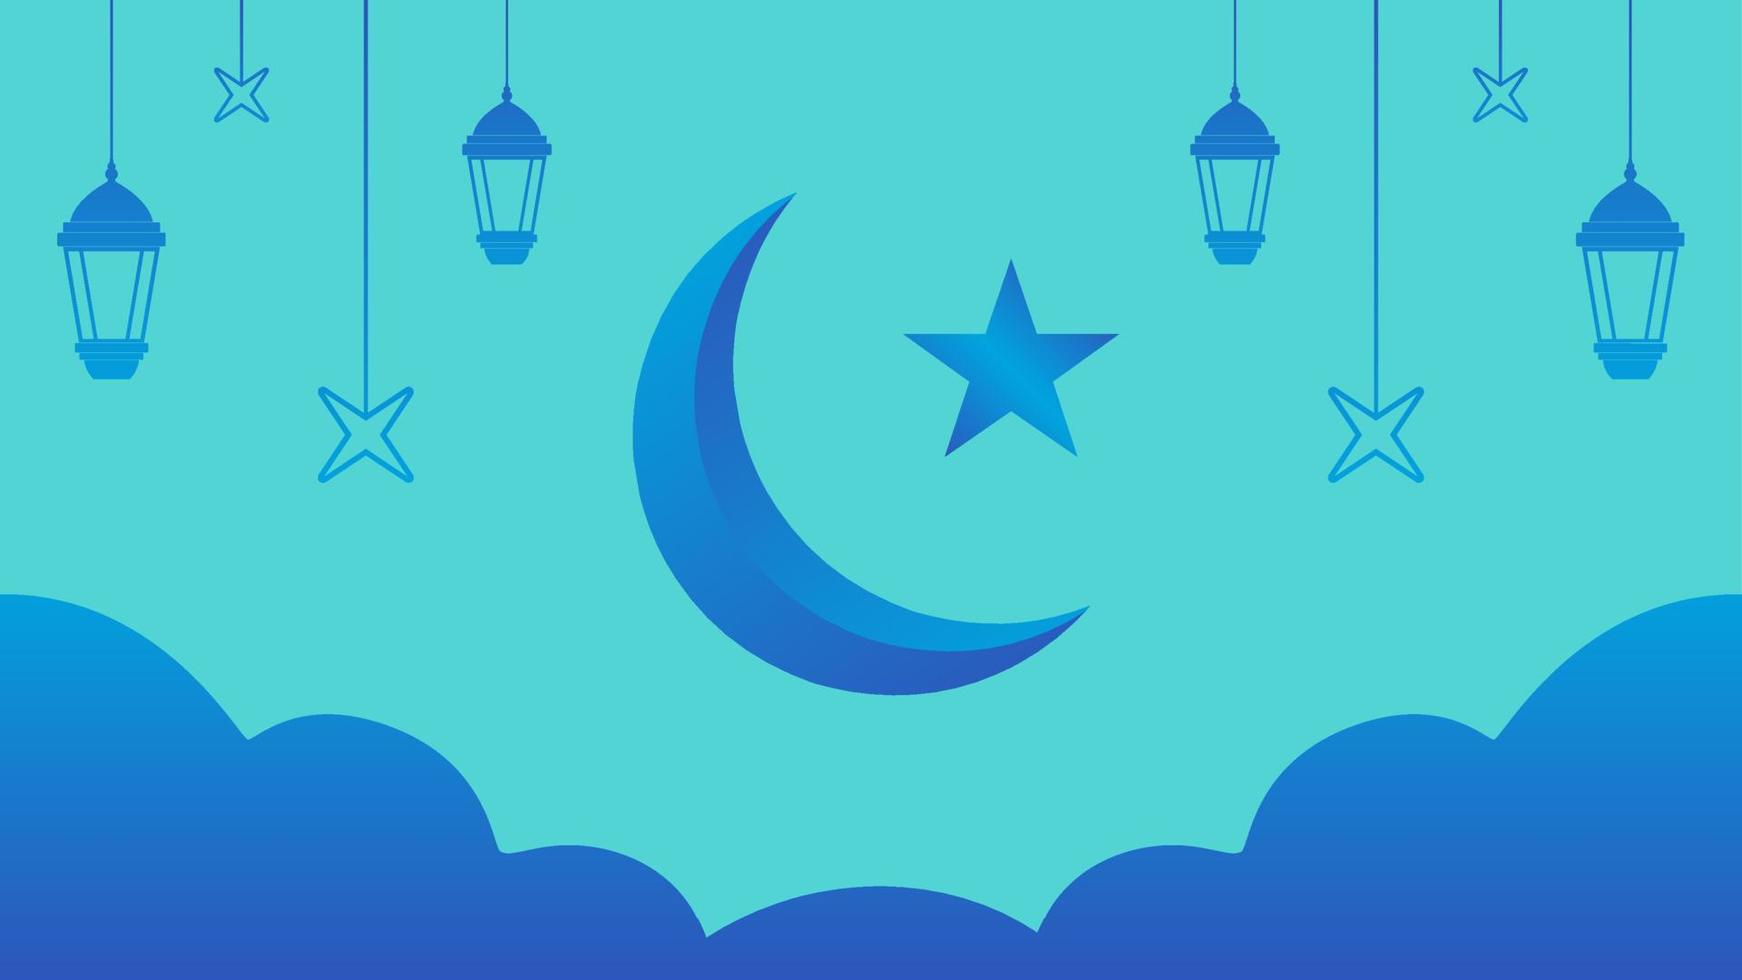 Islamic background of ramadan design for greeting card with blue color. Islamic layout for design graphic ramadan in muslim culture and islam religion. Lantern and crescent ornament for ramadan design vector